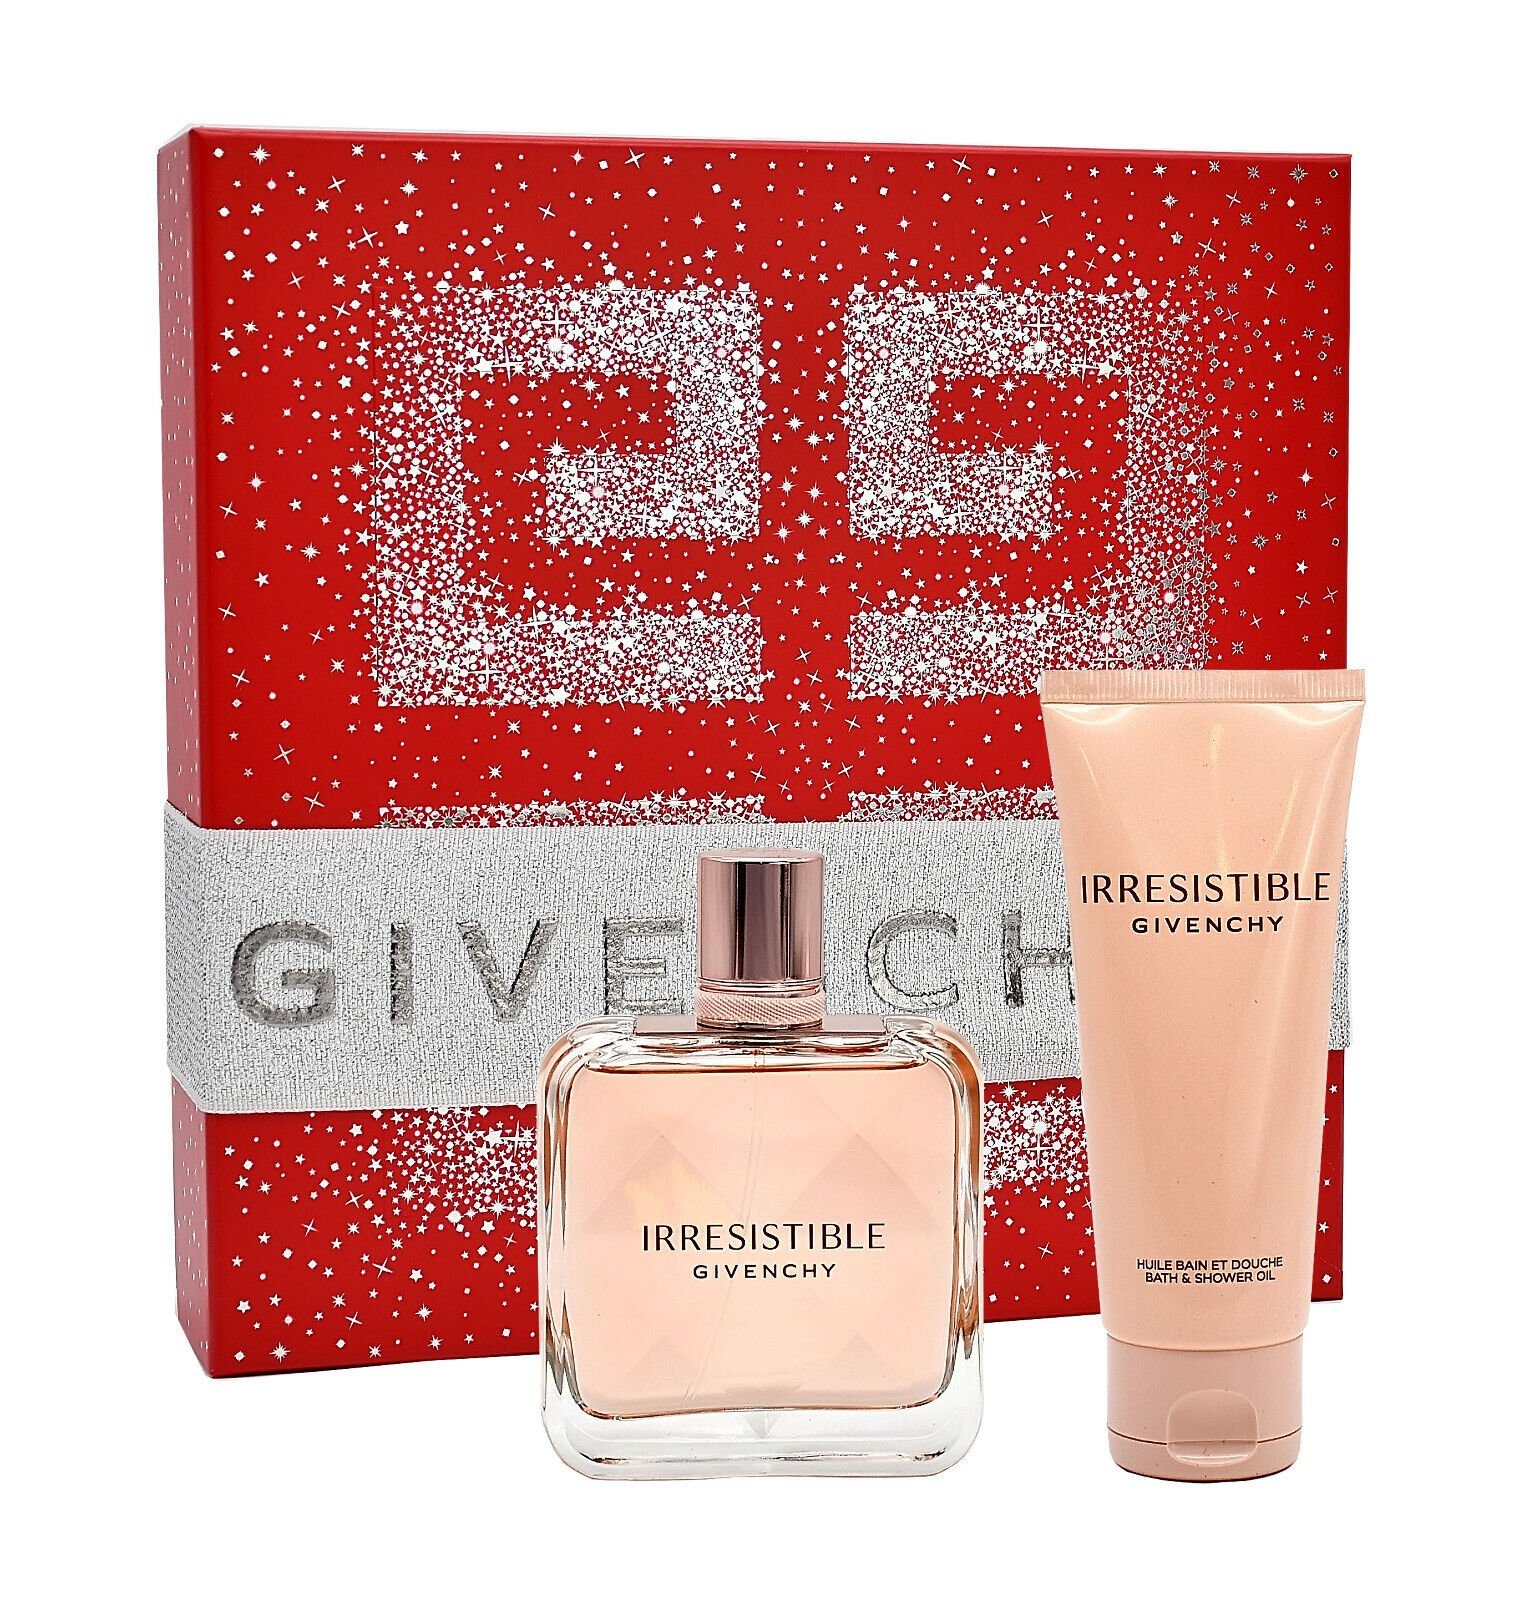 GIVENCHY SHOWER EDP 75ML IRRESISTIBLE Duft-Set + LOTION GIVENCHY 75ML 80ML GEL +BODY